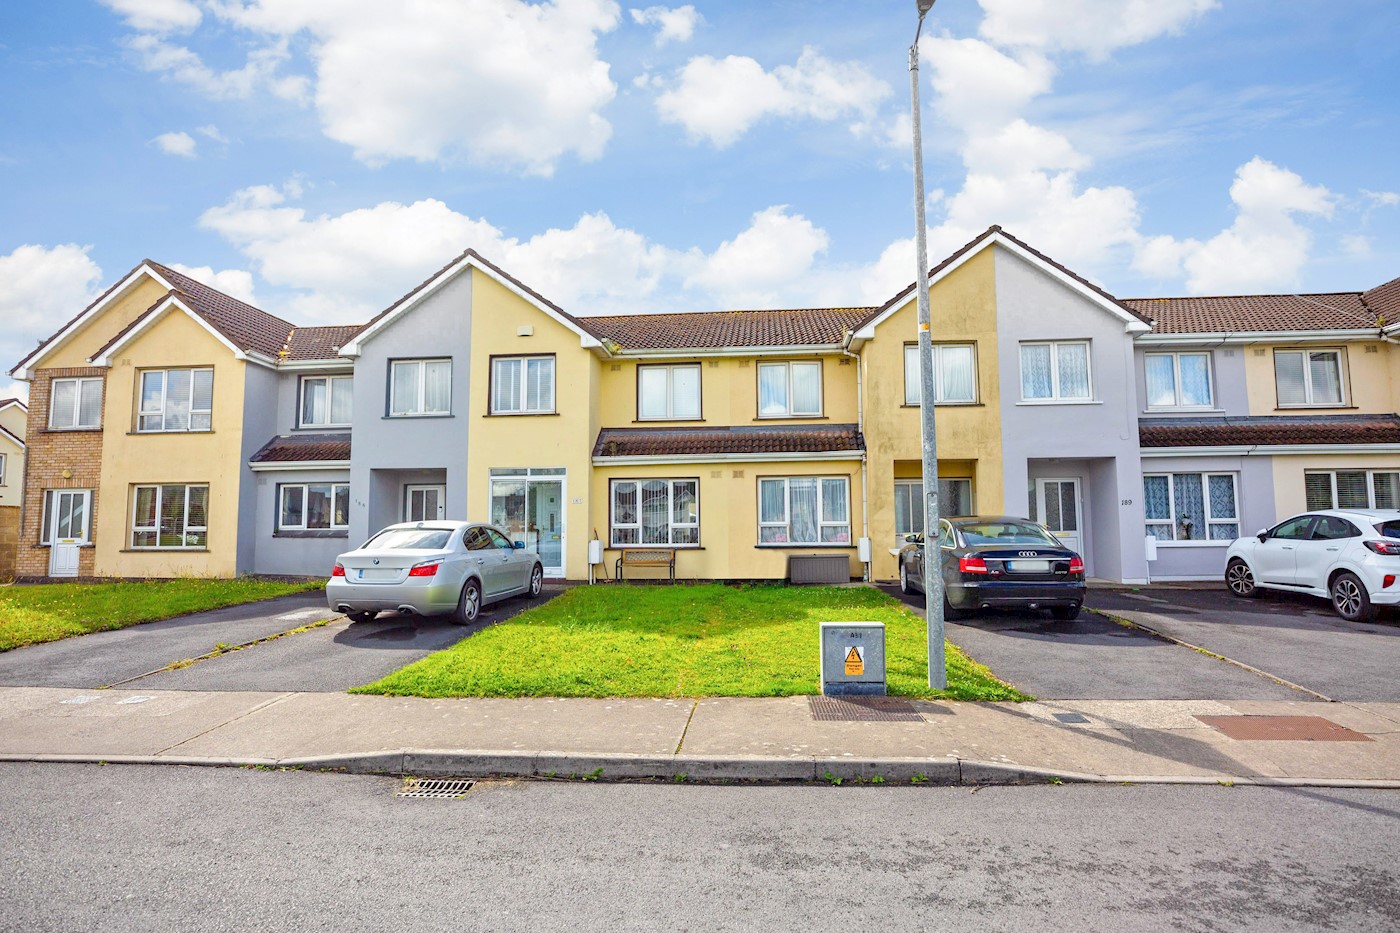 188 Sycamore Drive, Woodhaven, Castletroy, Co. Limerick, V94 RCP0 1/11